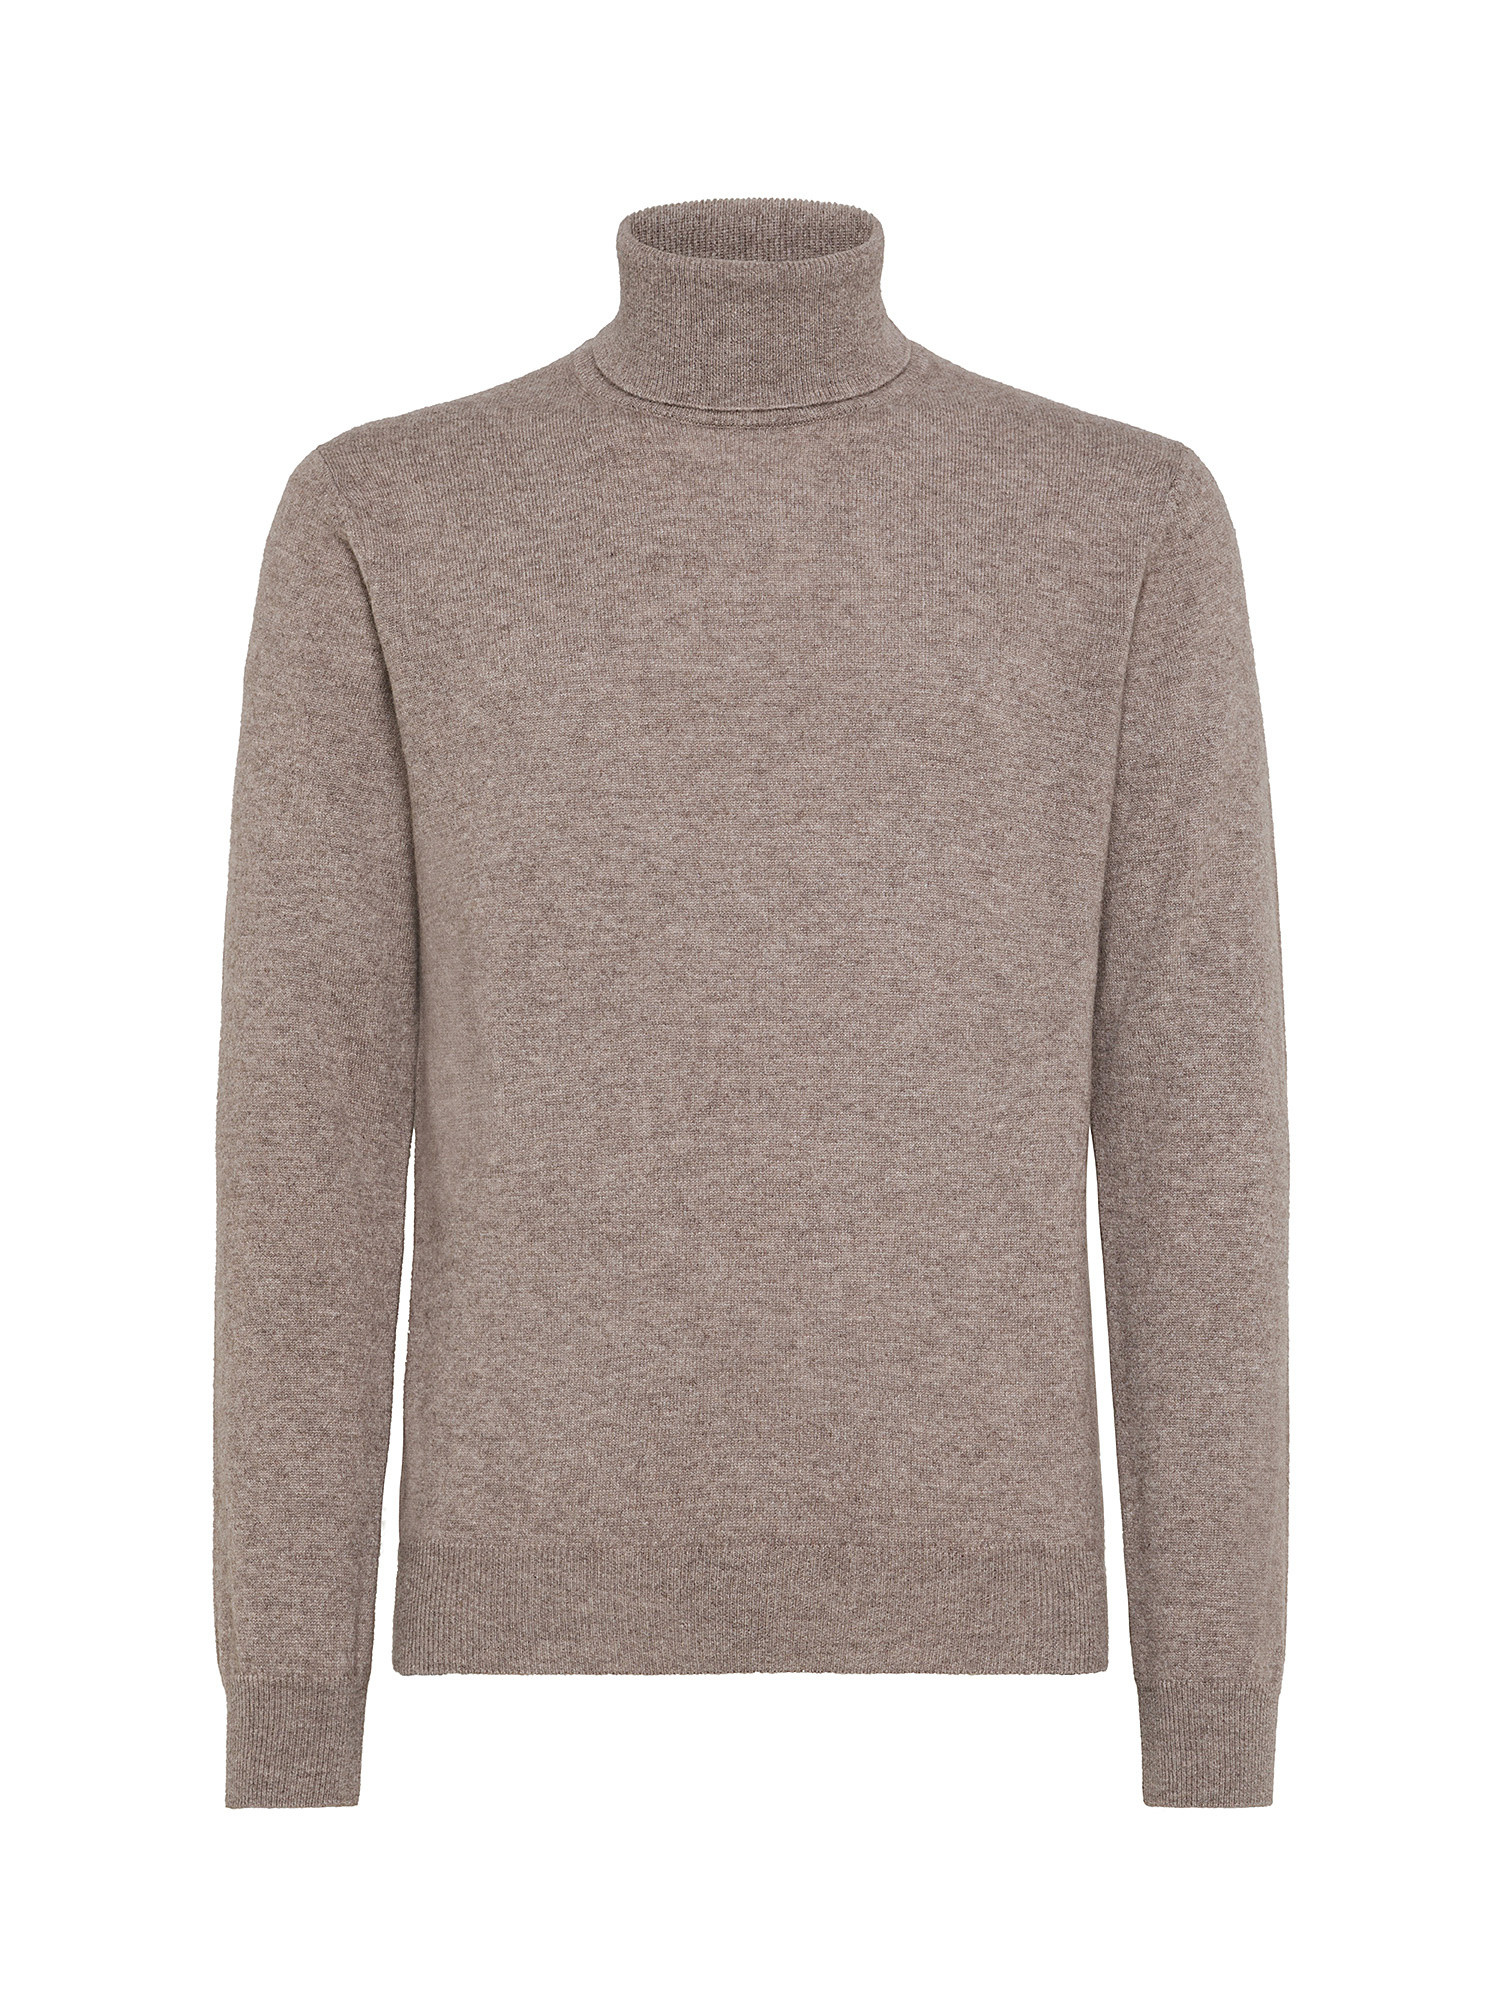 Coin Cashmere - Turtleneck in pure cashmere, Taupe Grey, large image number 0